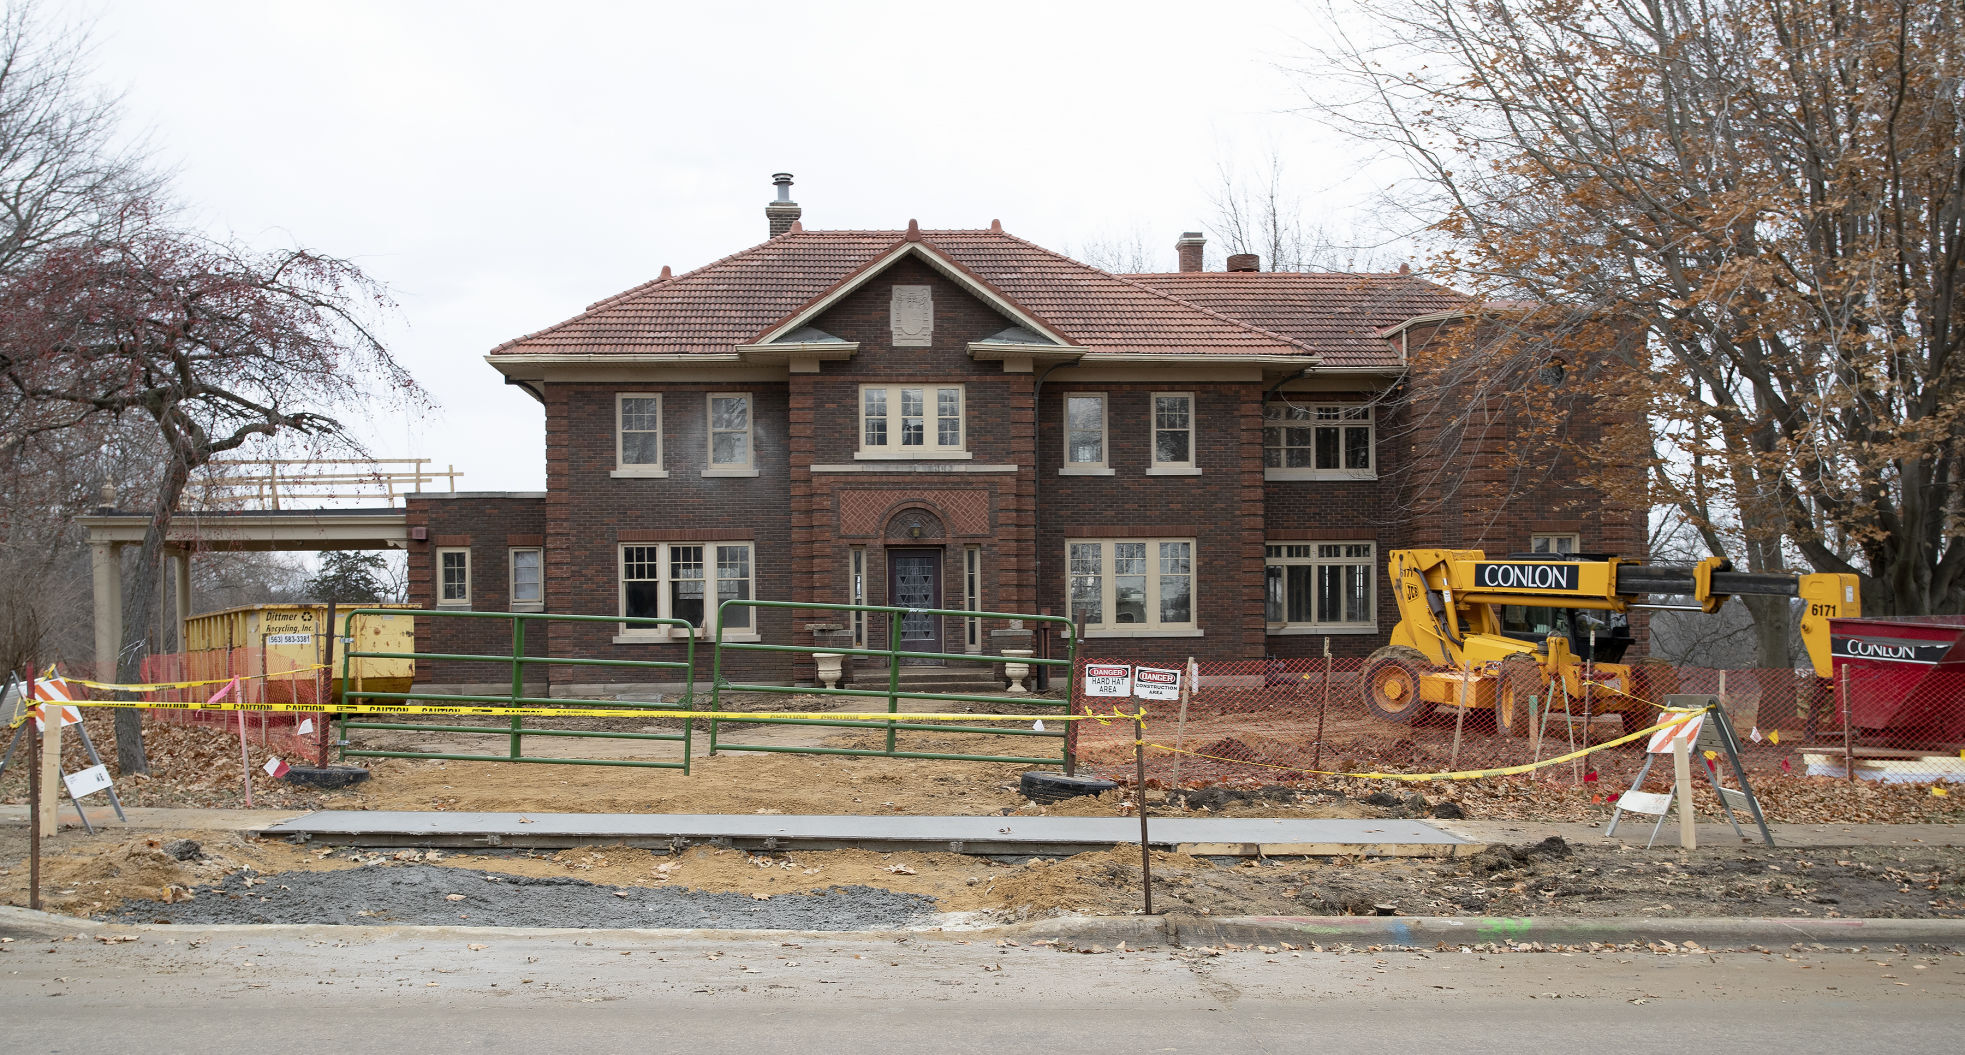 College giving historic Dubuque home $2.3 million facelift Tri-state News telegraphherald image image